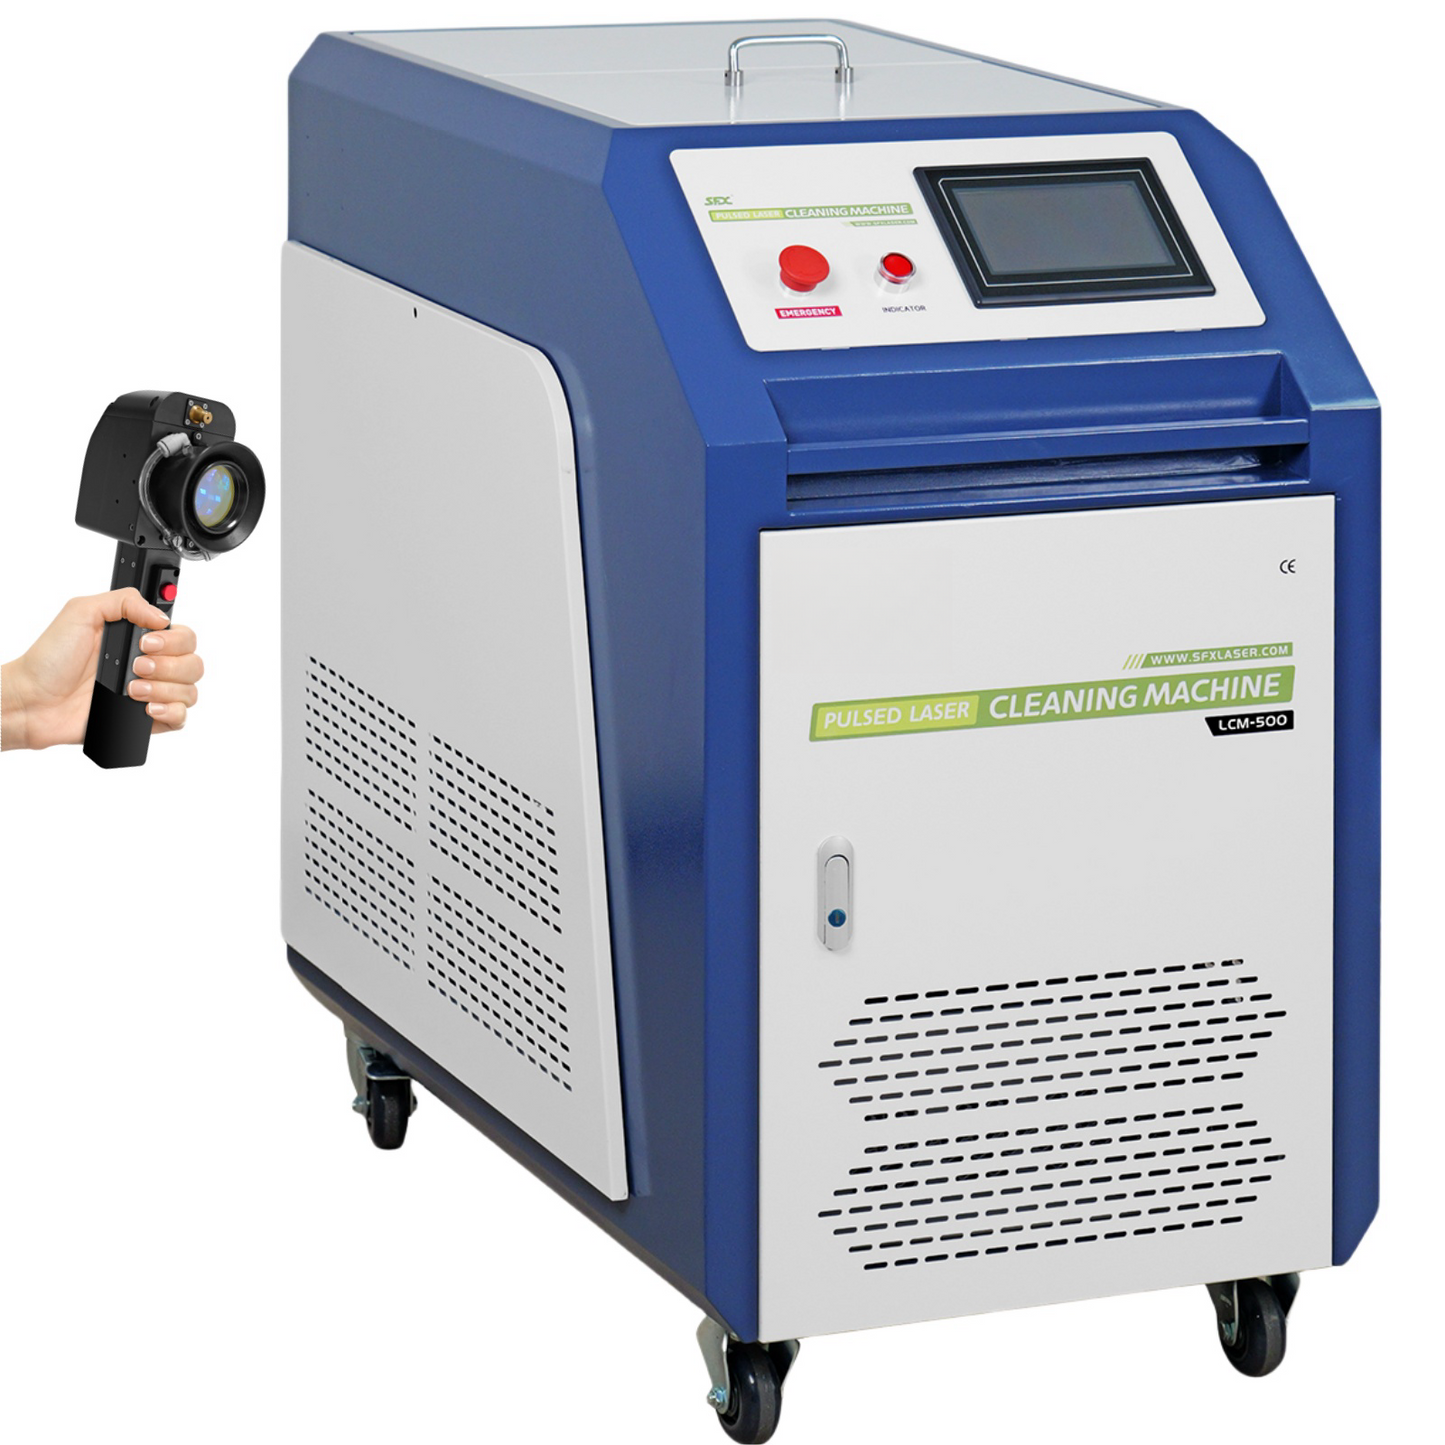 Air Cooled Handheld Laser Rust Remover